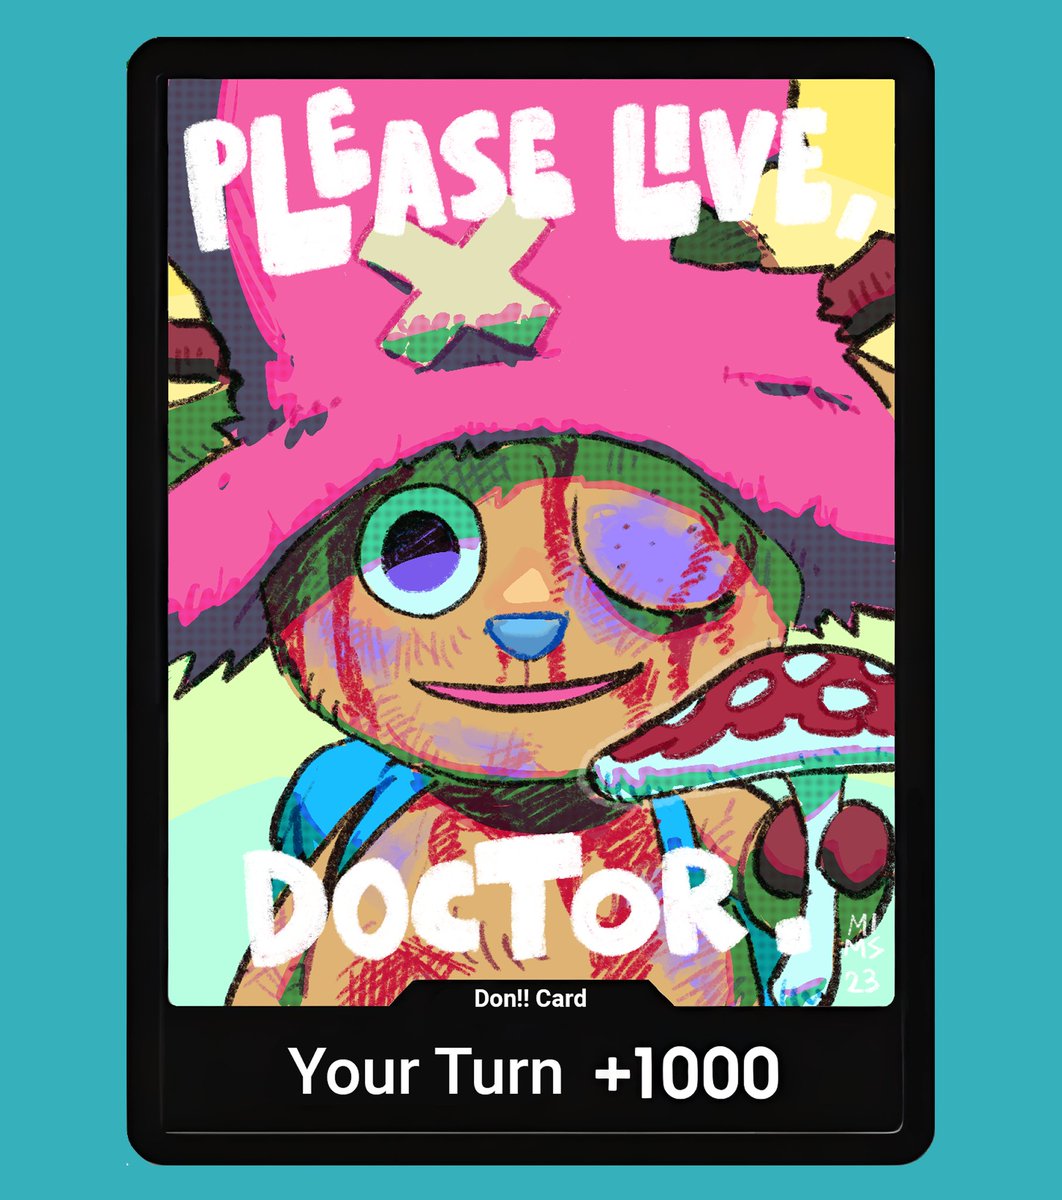 Please live...
Doctor. 🍄🏴‍☠️🌸

[ 6/10 DON!!! cards ]

Shares are appreciated 💖
.
.
.
#chopper #tonytonychopper #drumisland #onepiece #onepiececardgame